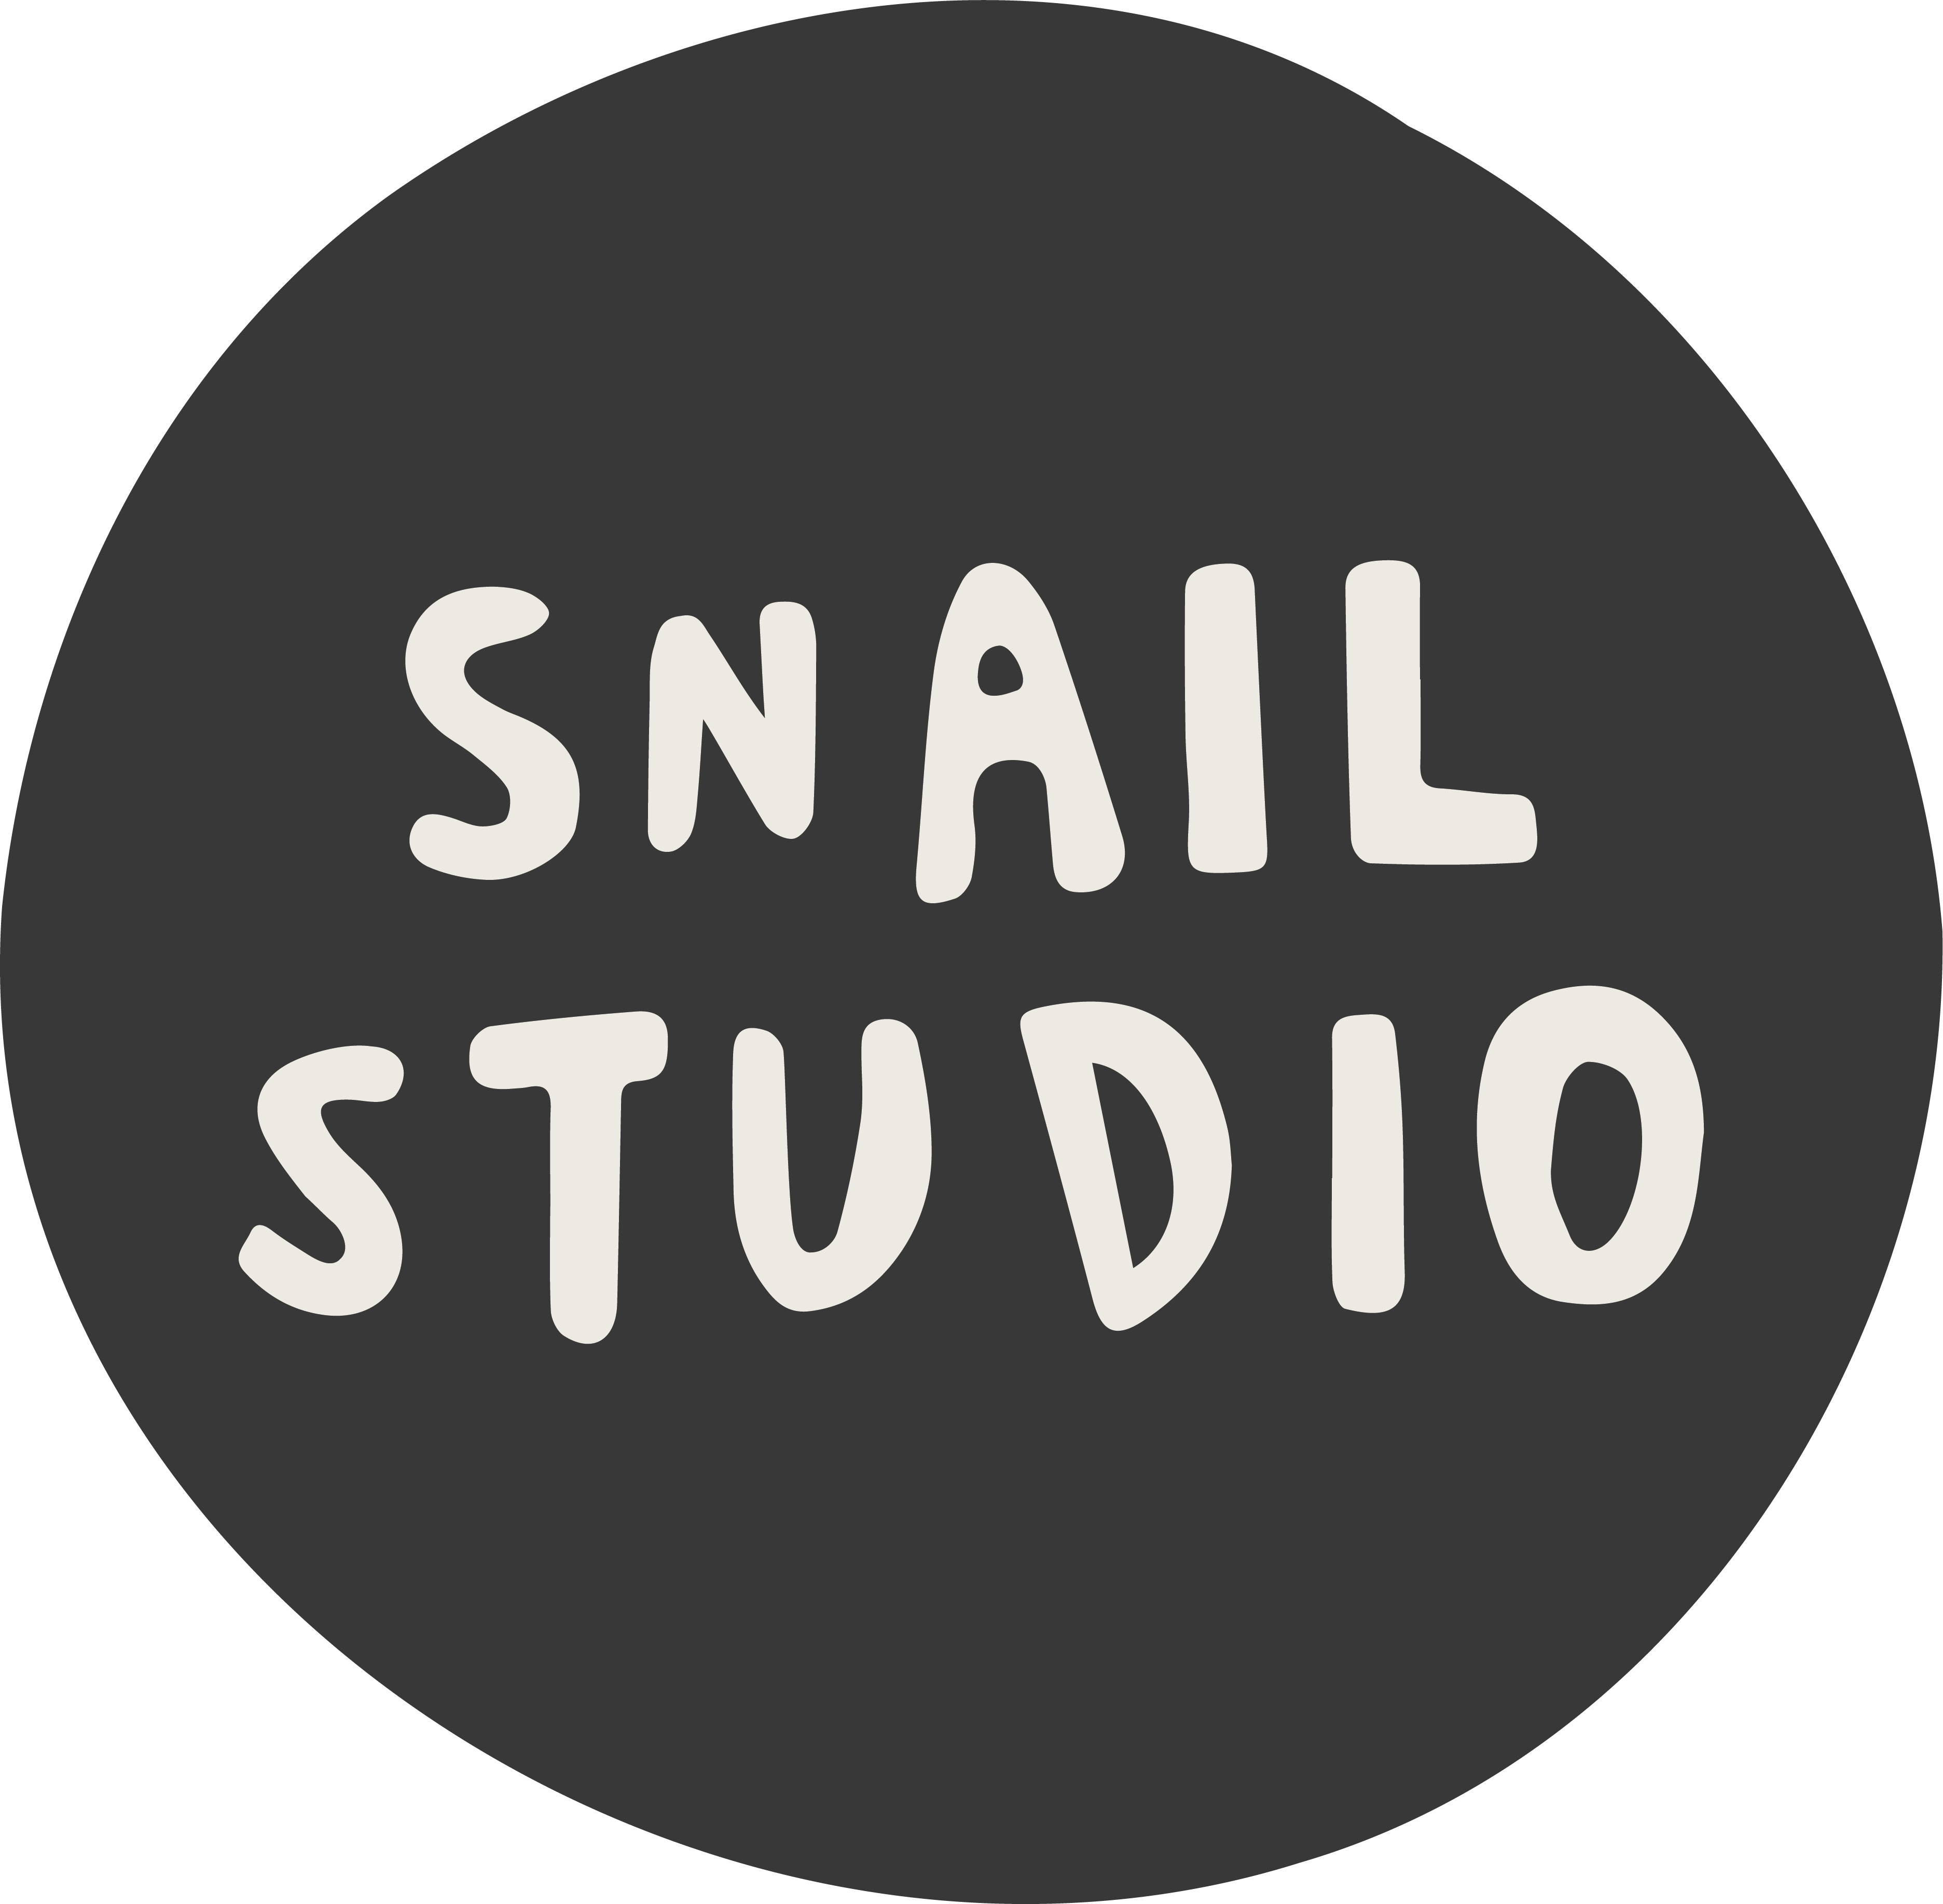 Snail Studio, written in a slightly wobbly circle